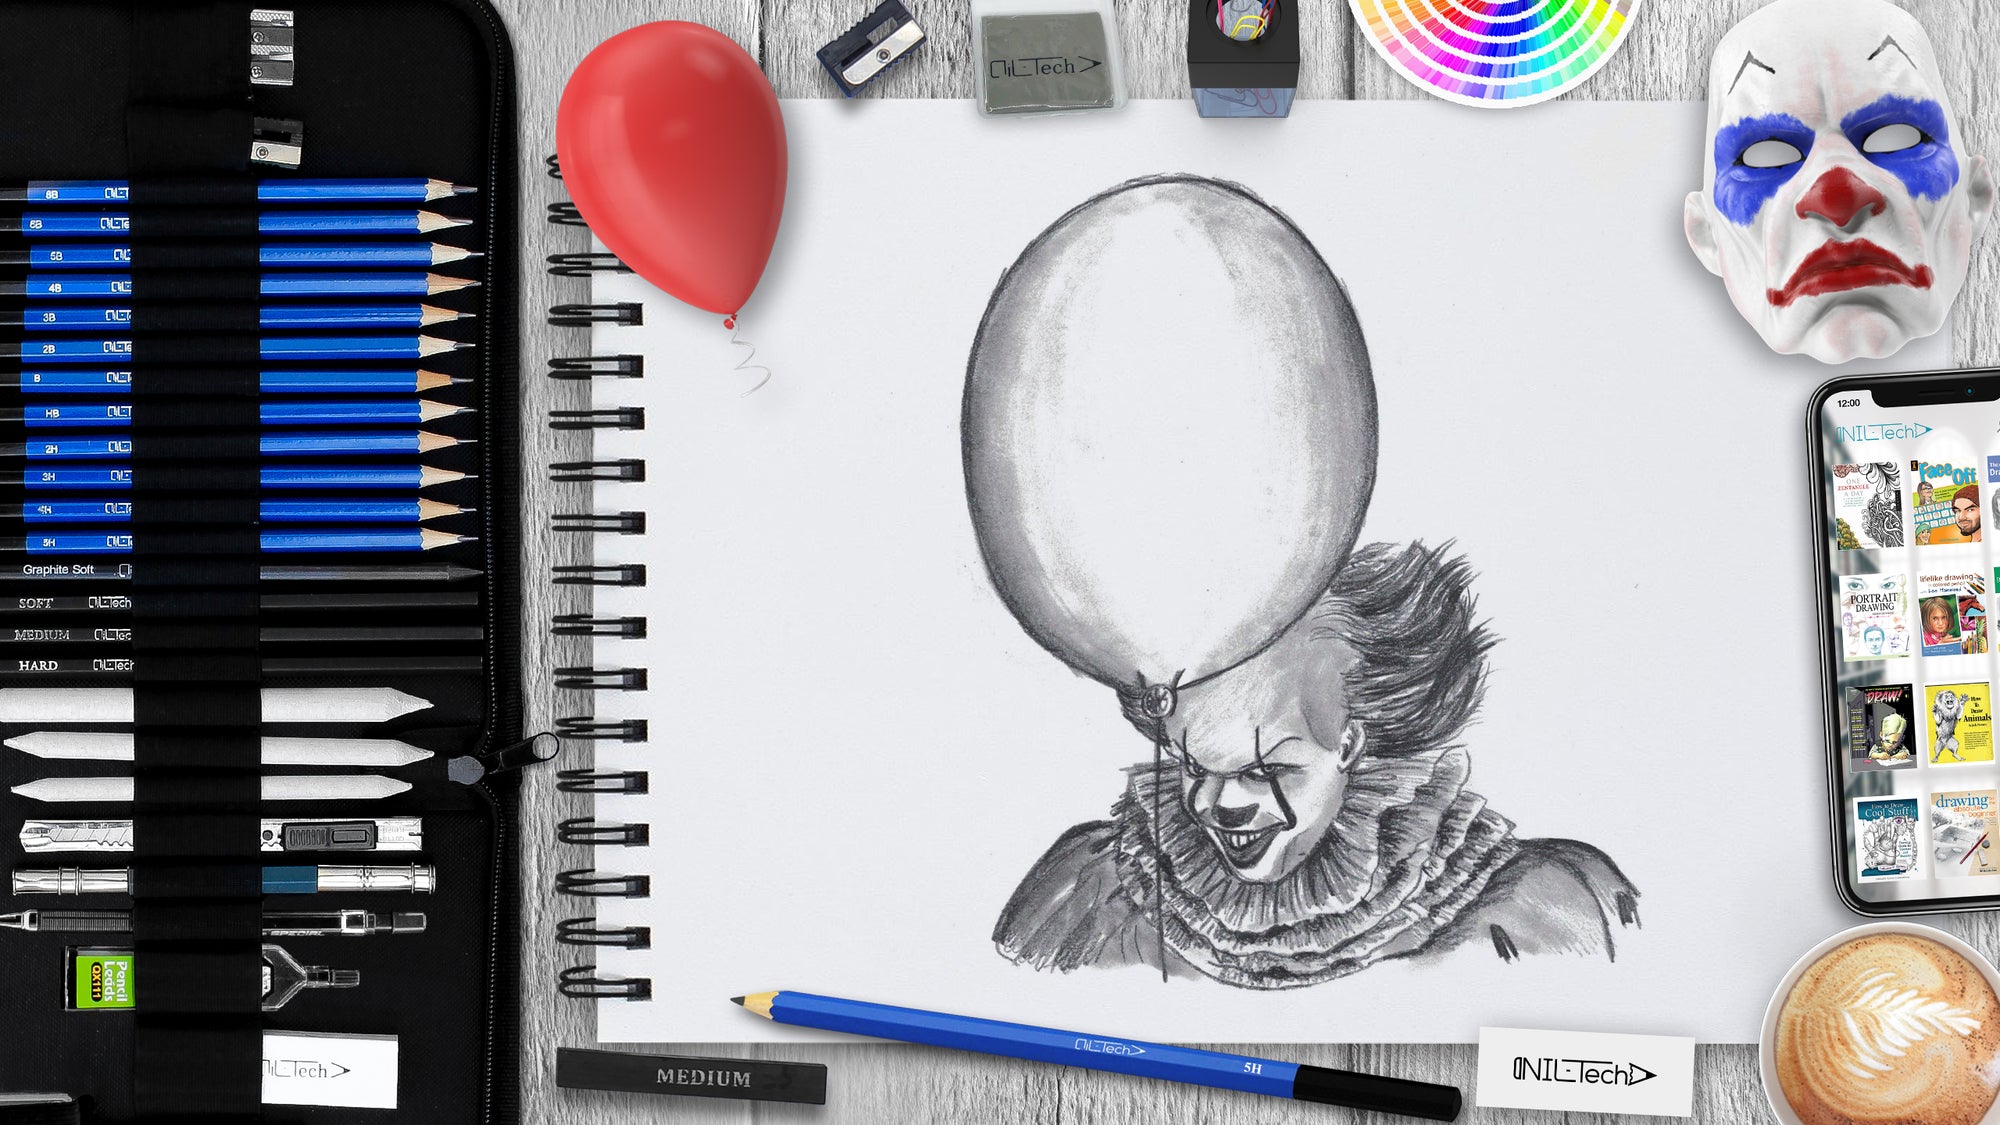 How to Draw PENNYWISE  Easy Step-by-Step Tutorial 